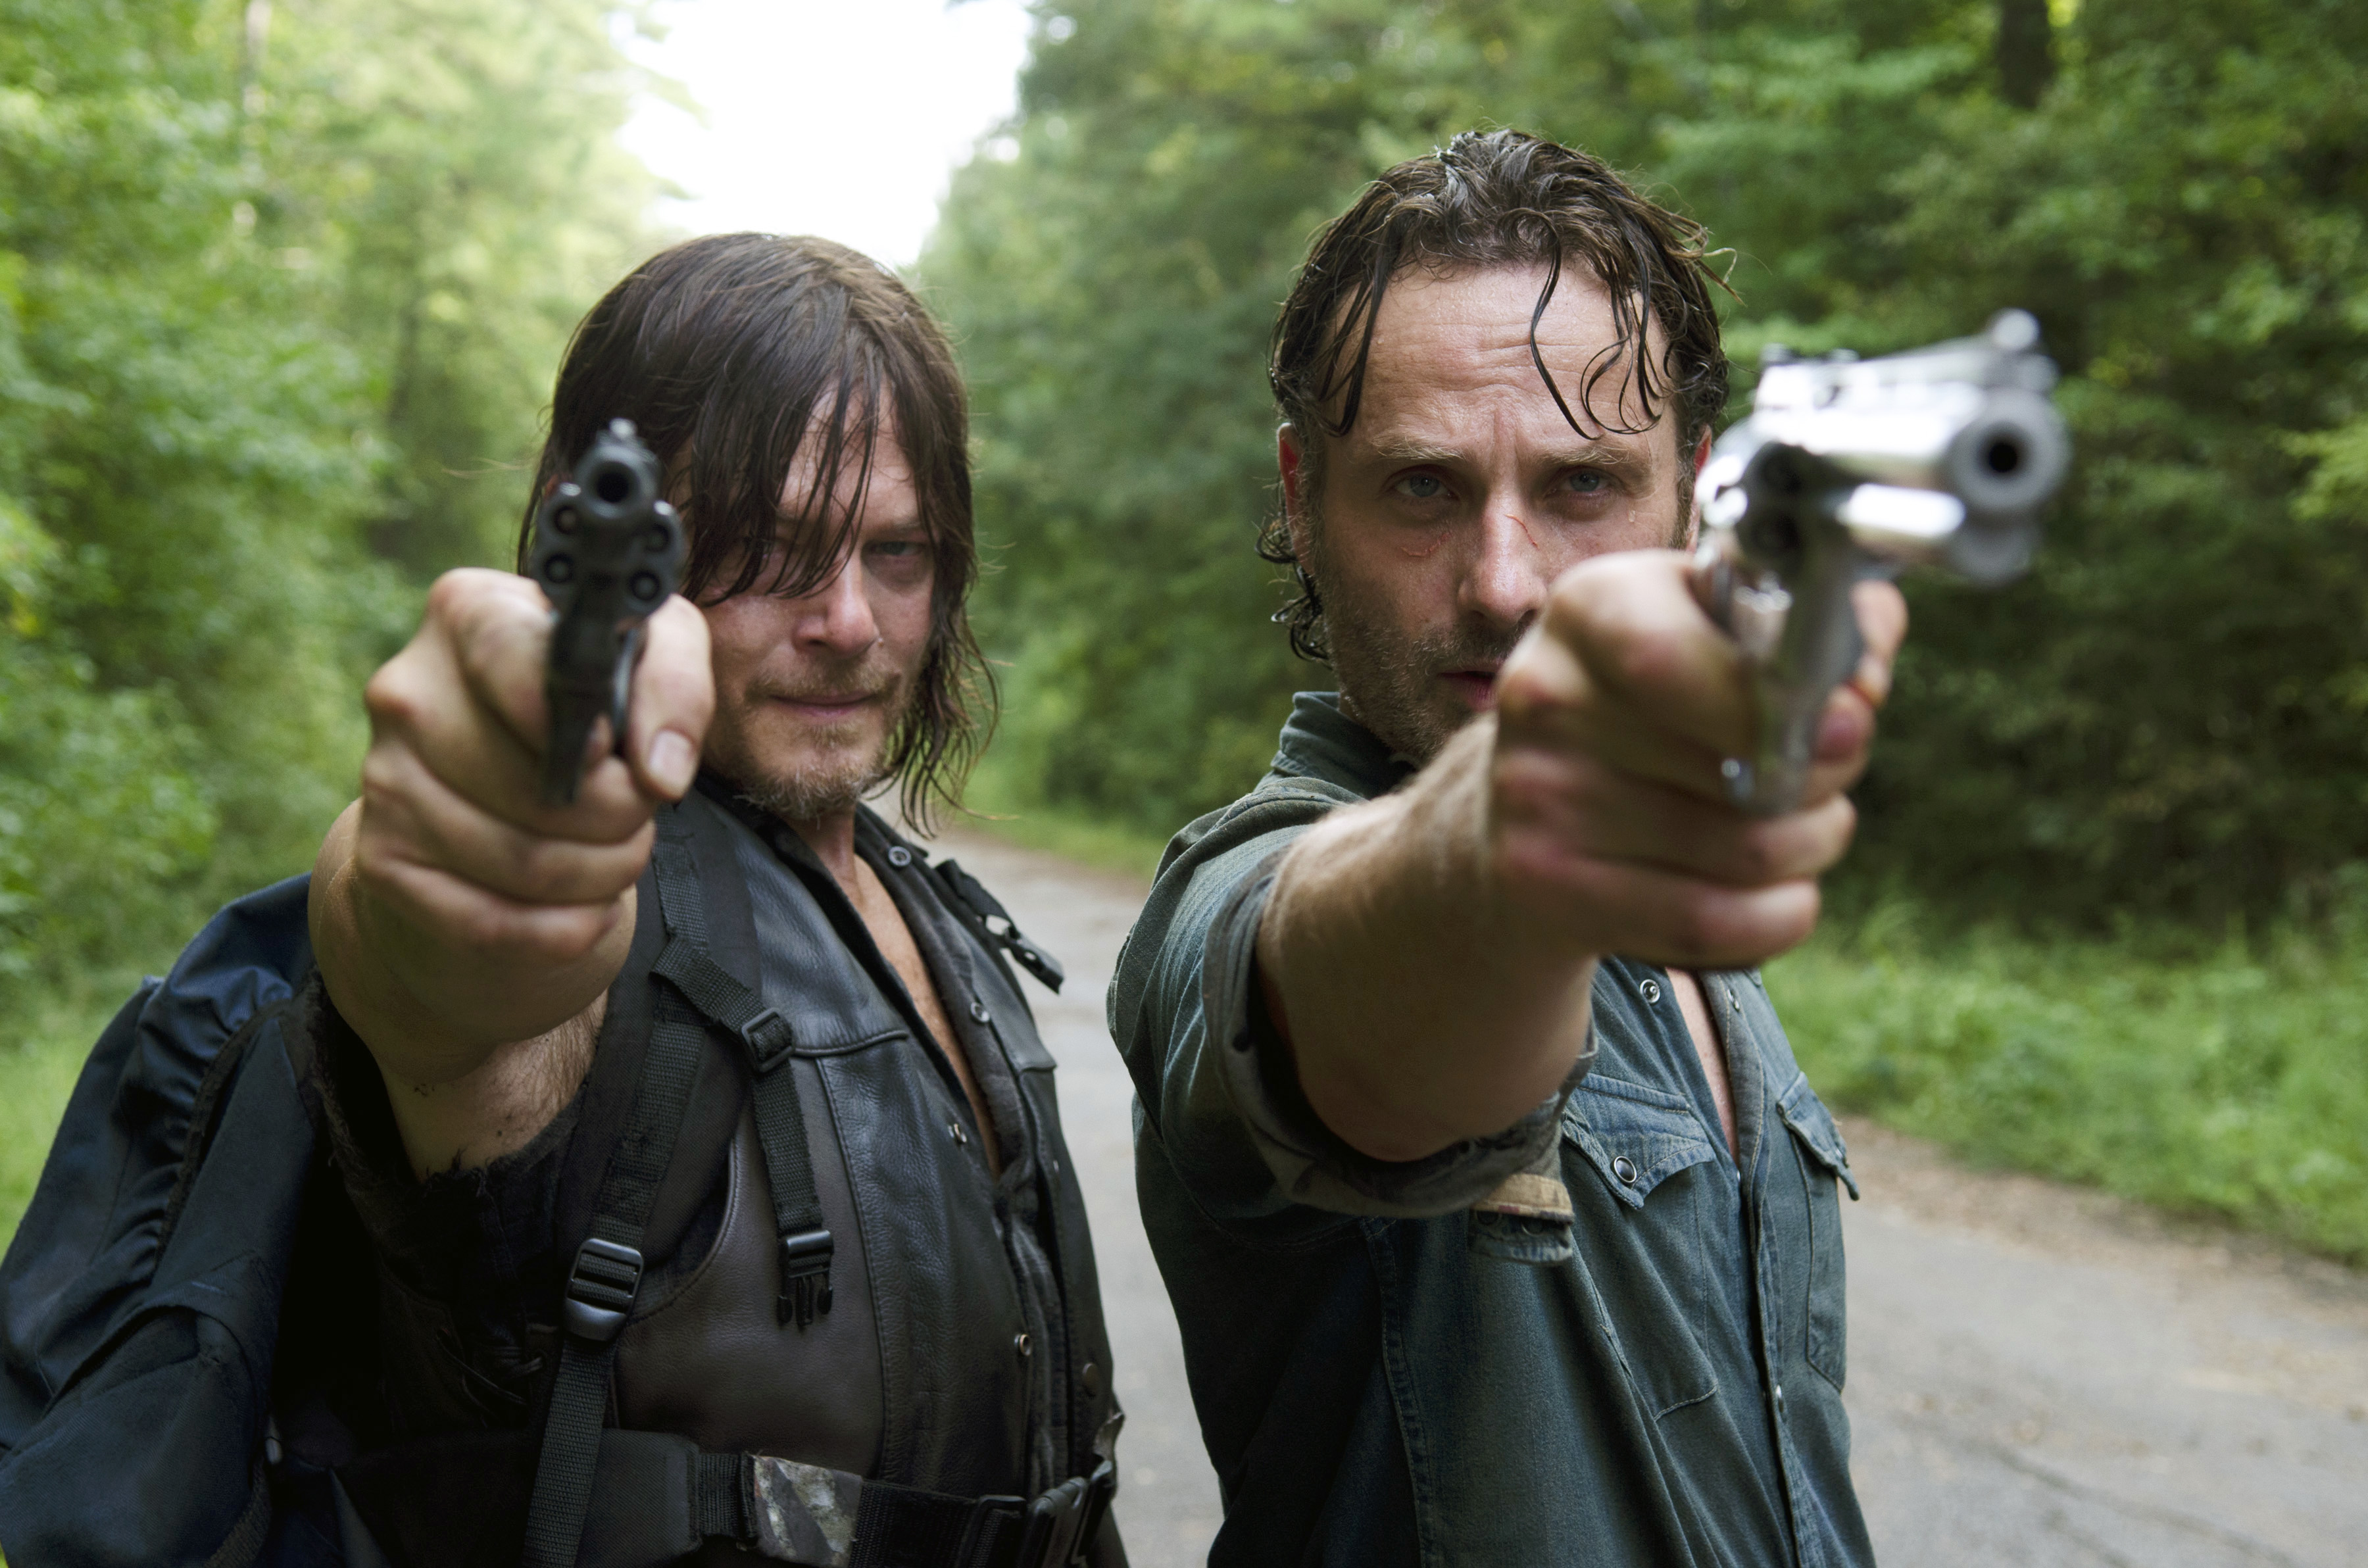 Daryl and Rick take aim at a drifter who may be more than he seems.